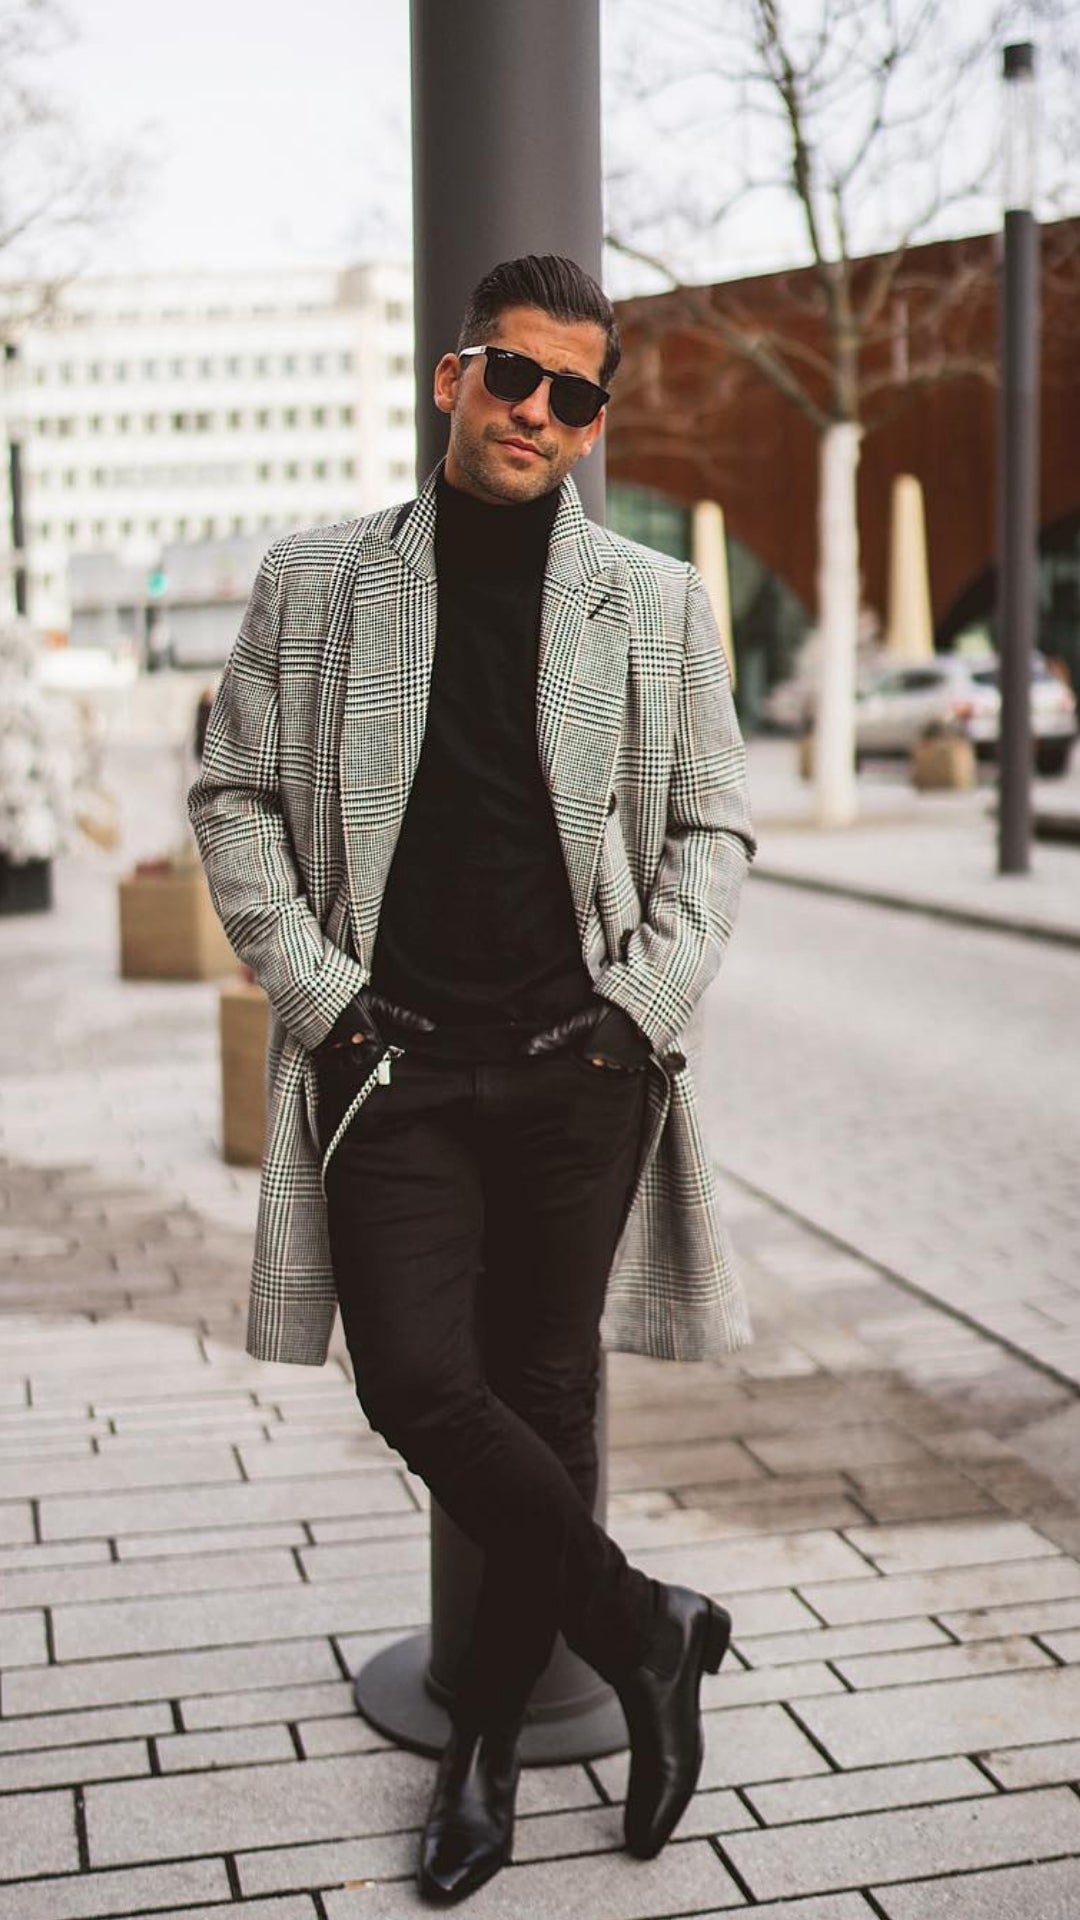 Want To Dress Sharp? Copy This Guy. #mensfashion #casual #outfits # ...